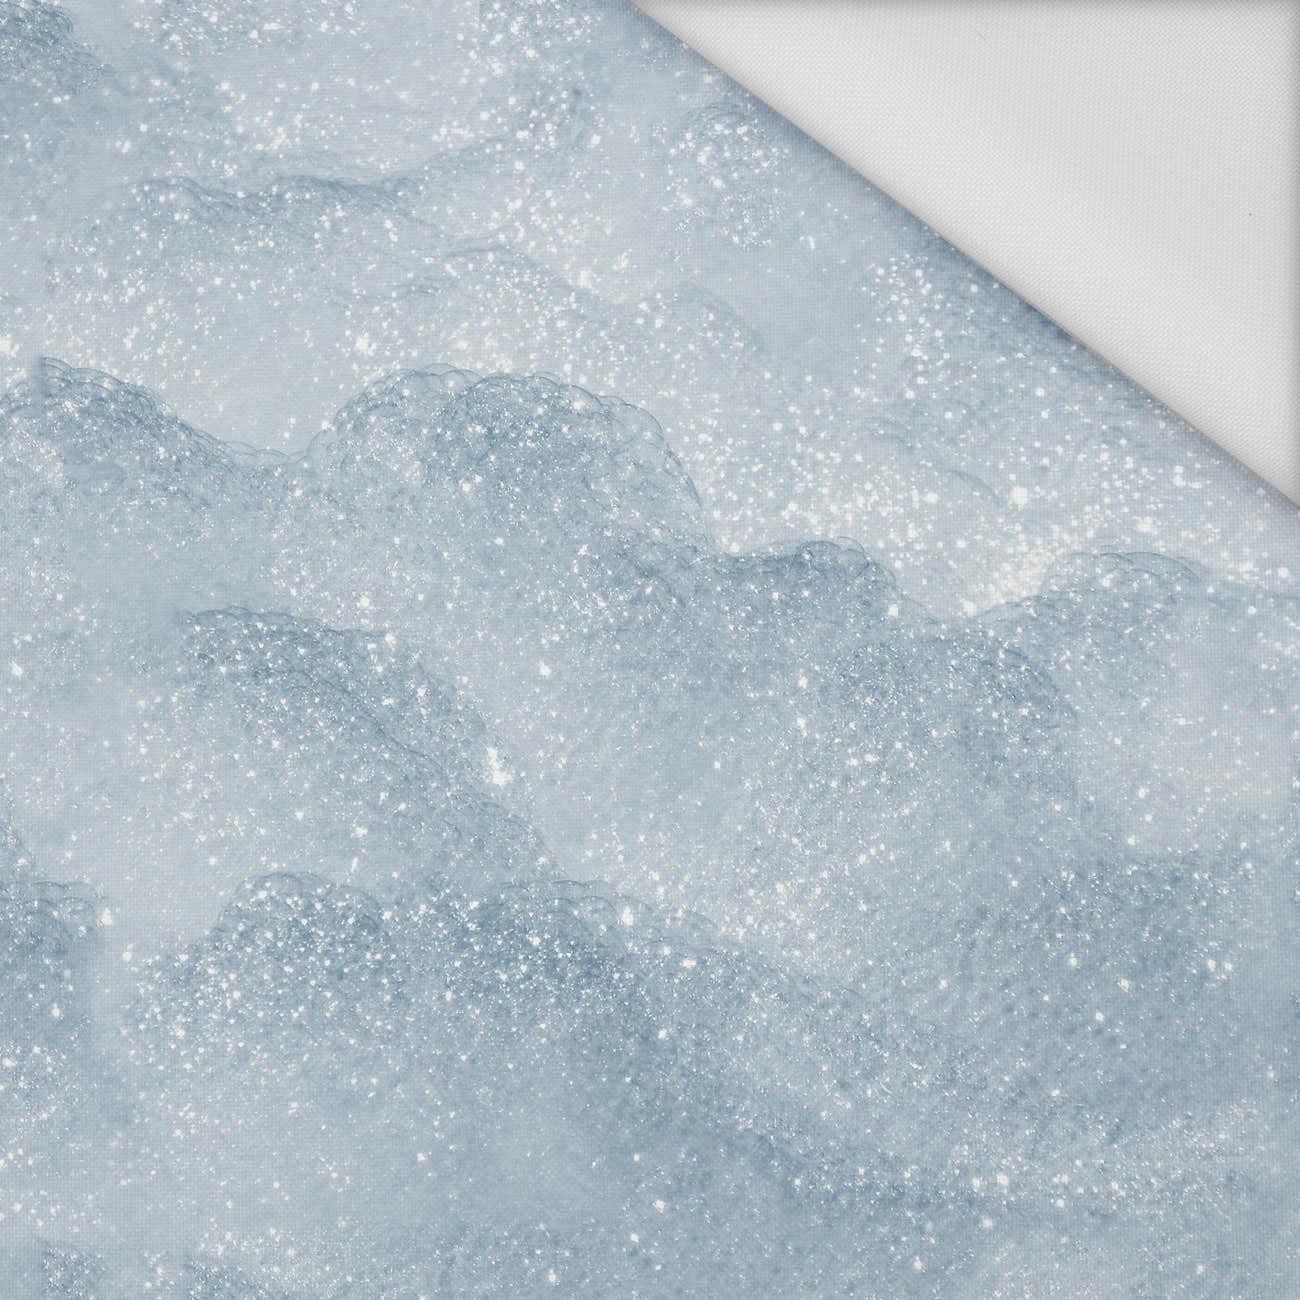 SNOW / light blue (PAINTED ON GLASS) - Waterproof woven fabric